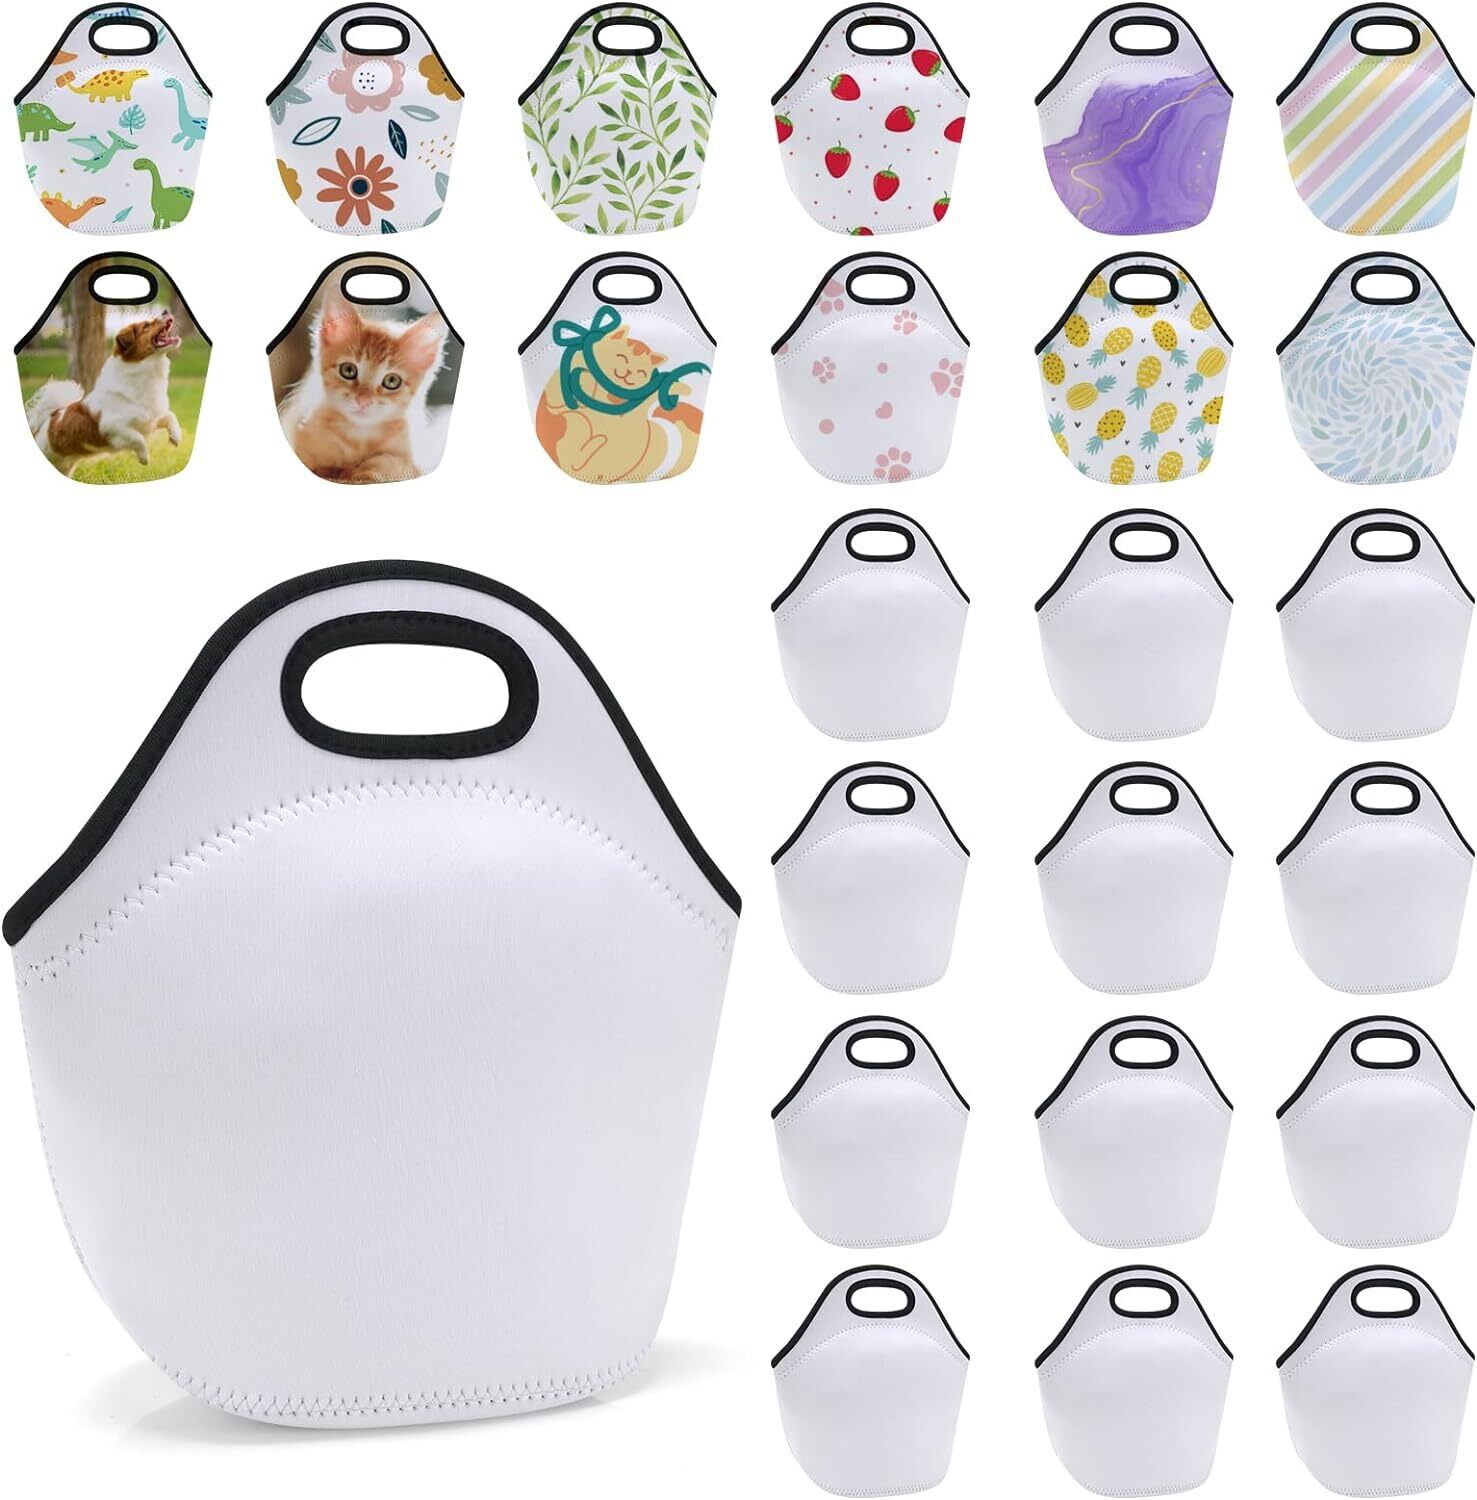 25 Pieces Sublimation Blank Neoprene Lunch Bags Reusable Insulated White 